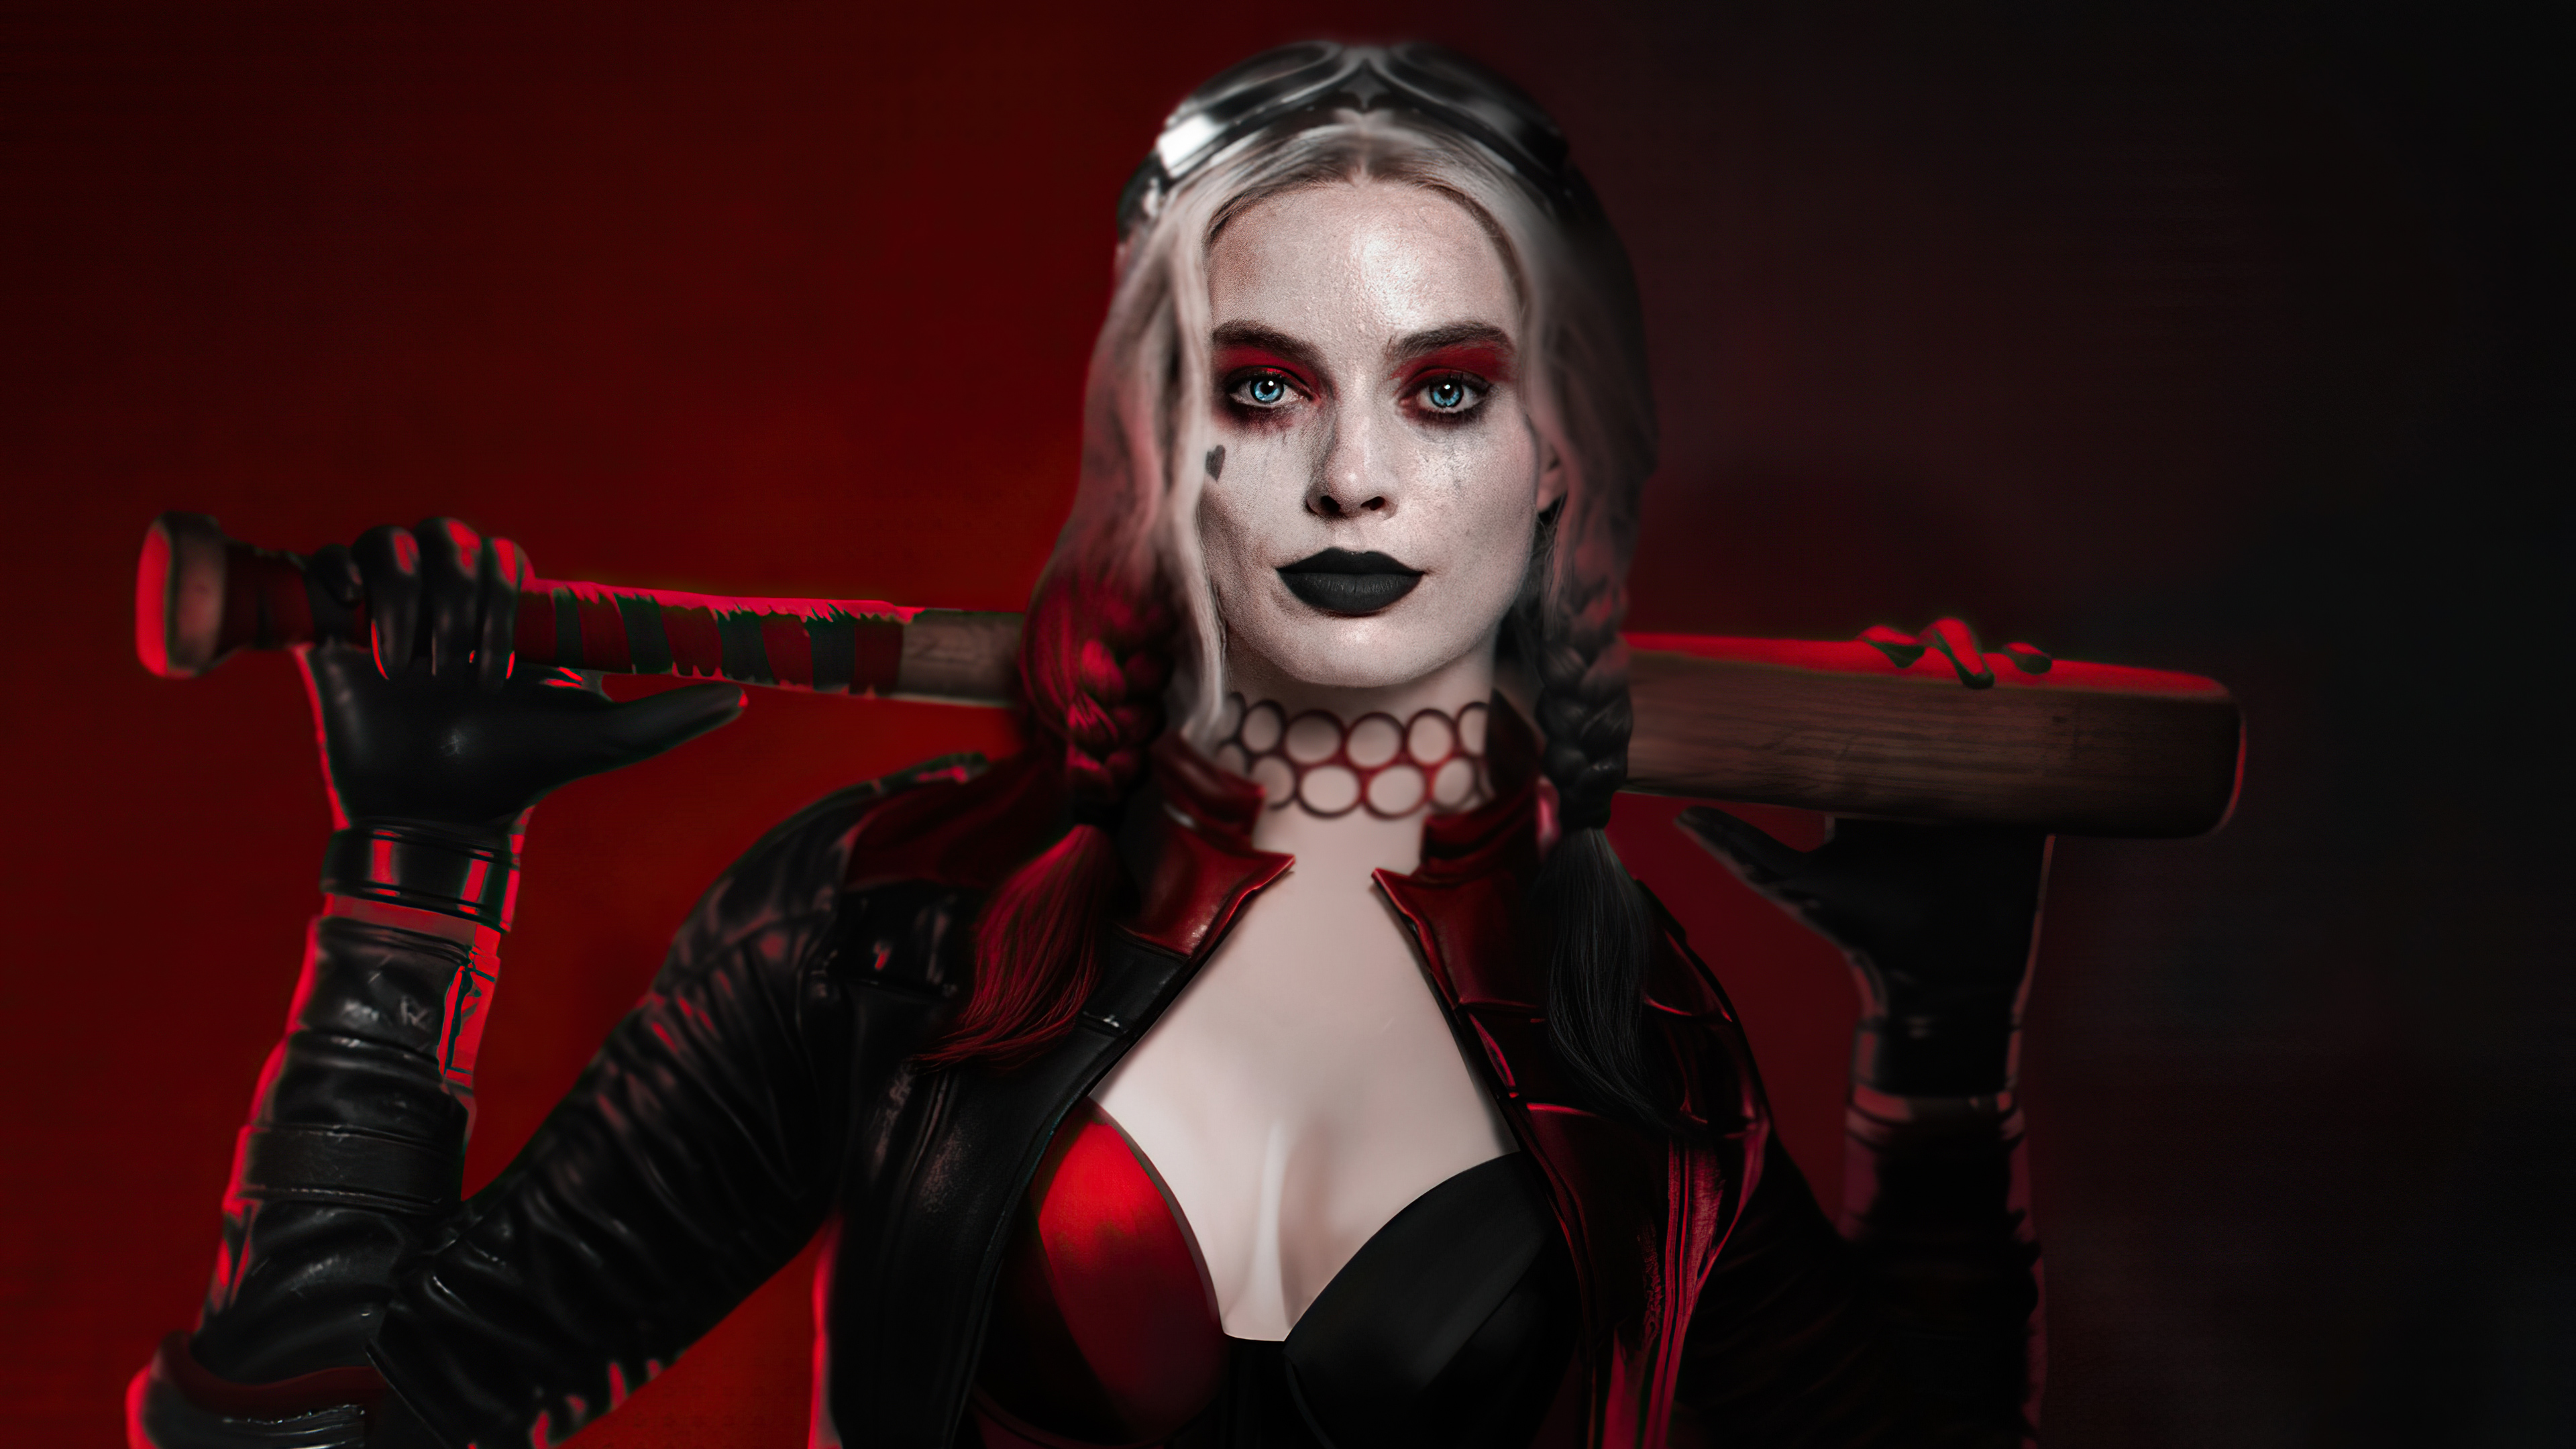 harleen quinzel, dc comics, the suicide squad, movie, blue eyes, harley quinn, lipstick, suicide squad